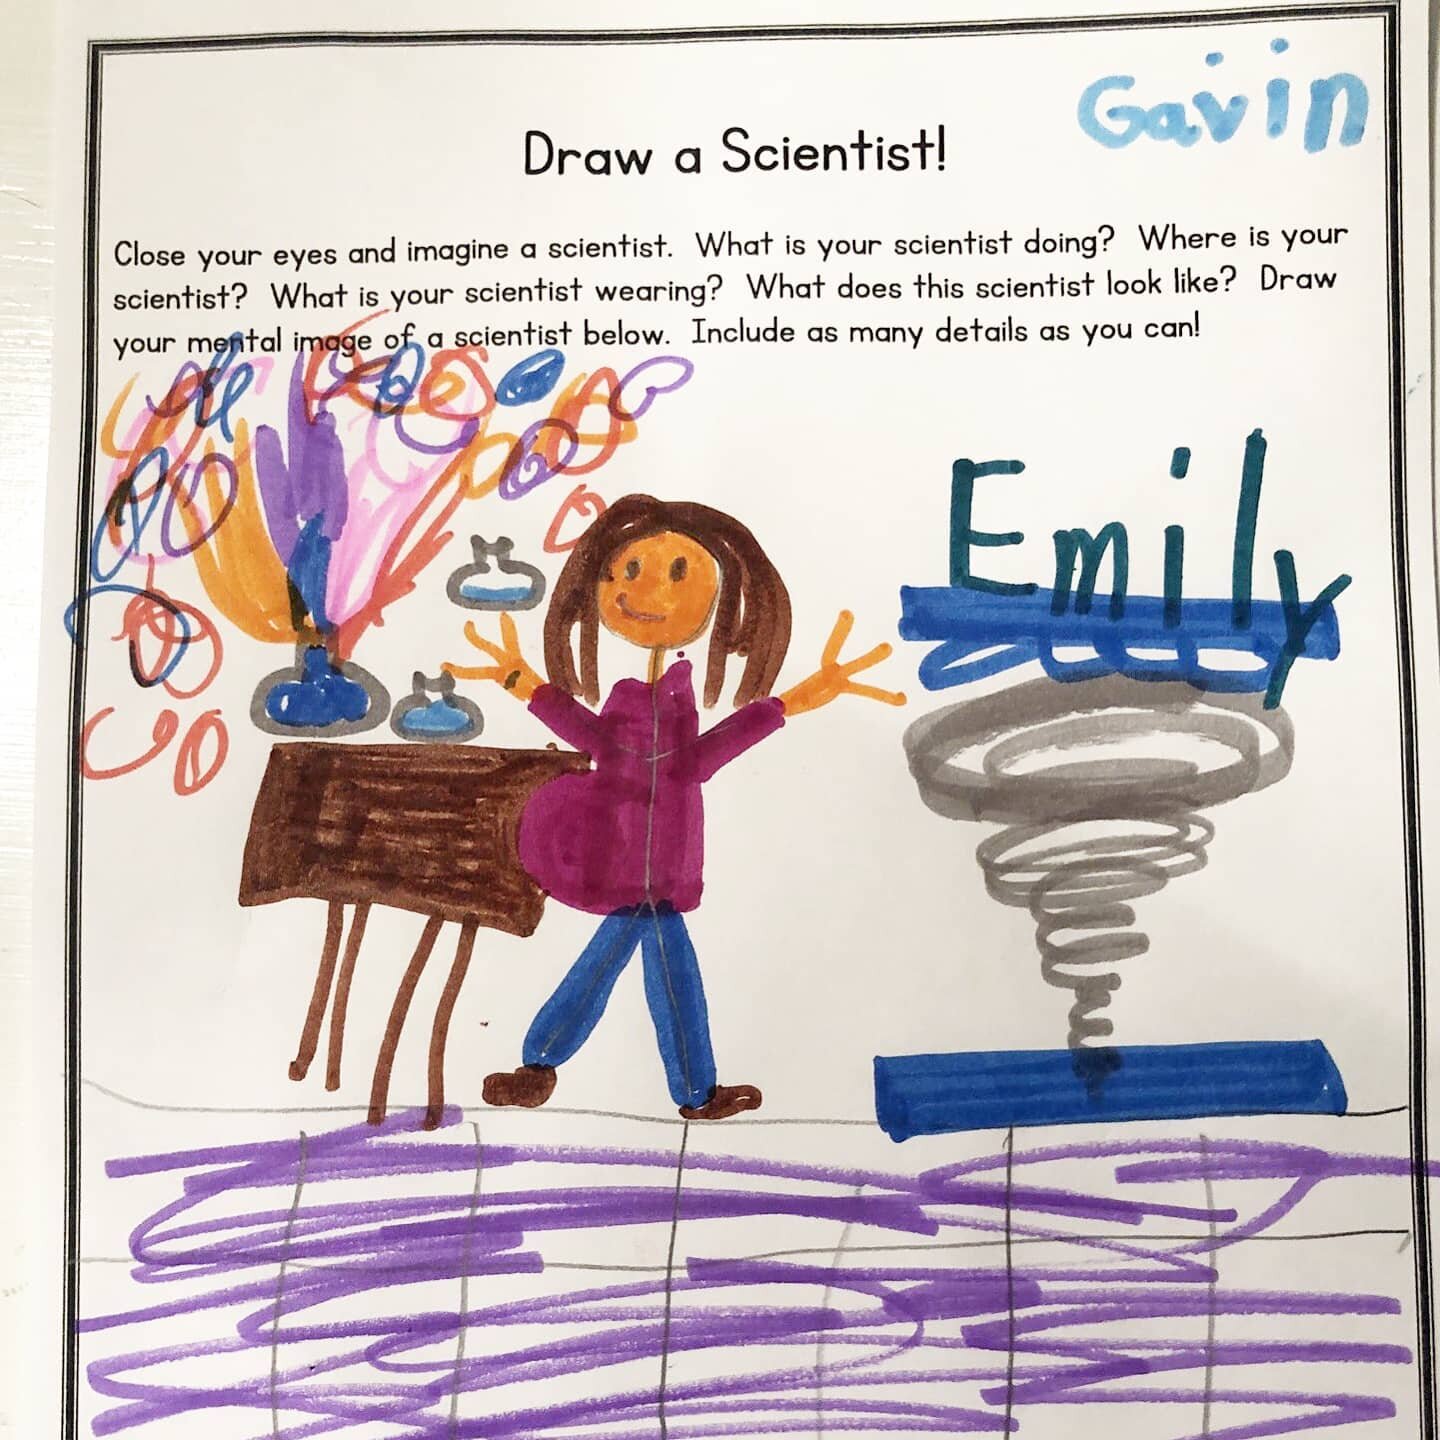 The Draw a Scientist Test 🎨was first conducted in 1983 in order to study when children learn about stereotypes about scientists. 

In the original study of nearly 5,000 kids - only 28 of the girls and no boys drew female scientists. That's about 0.5